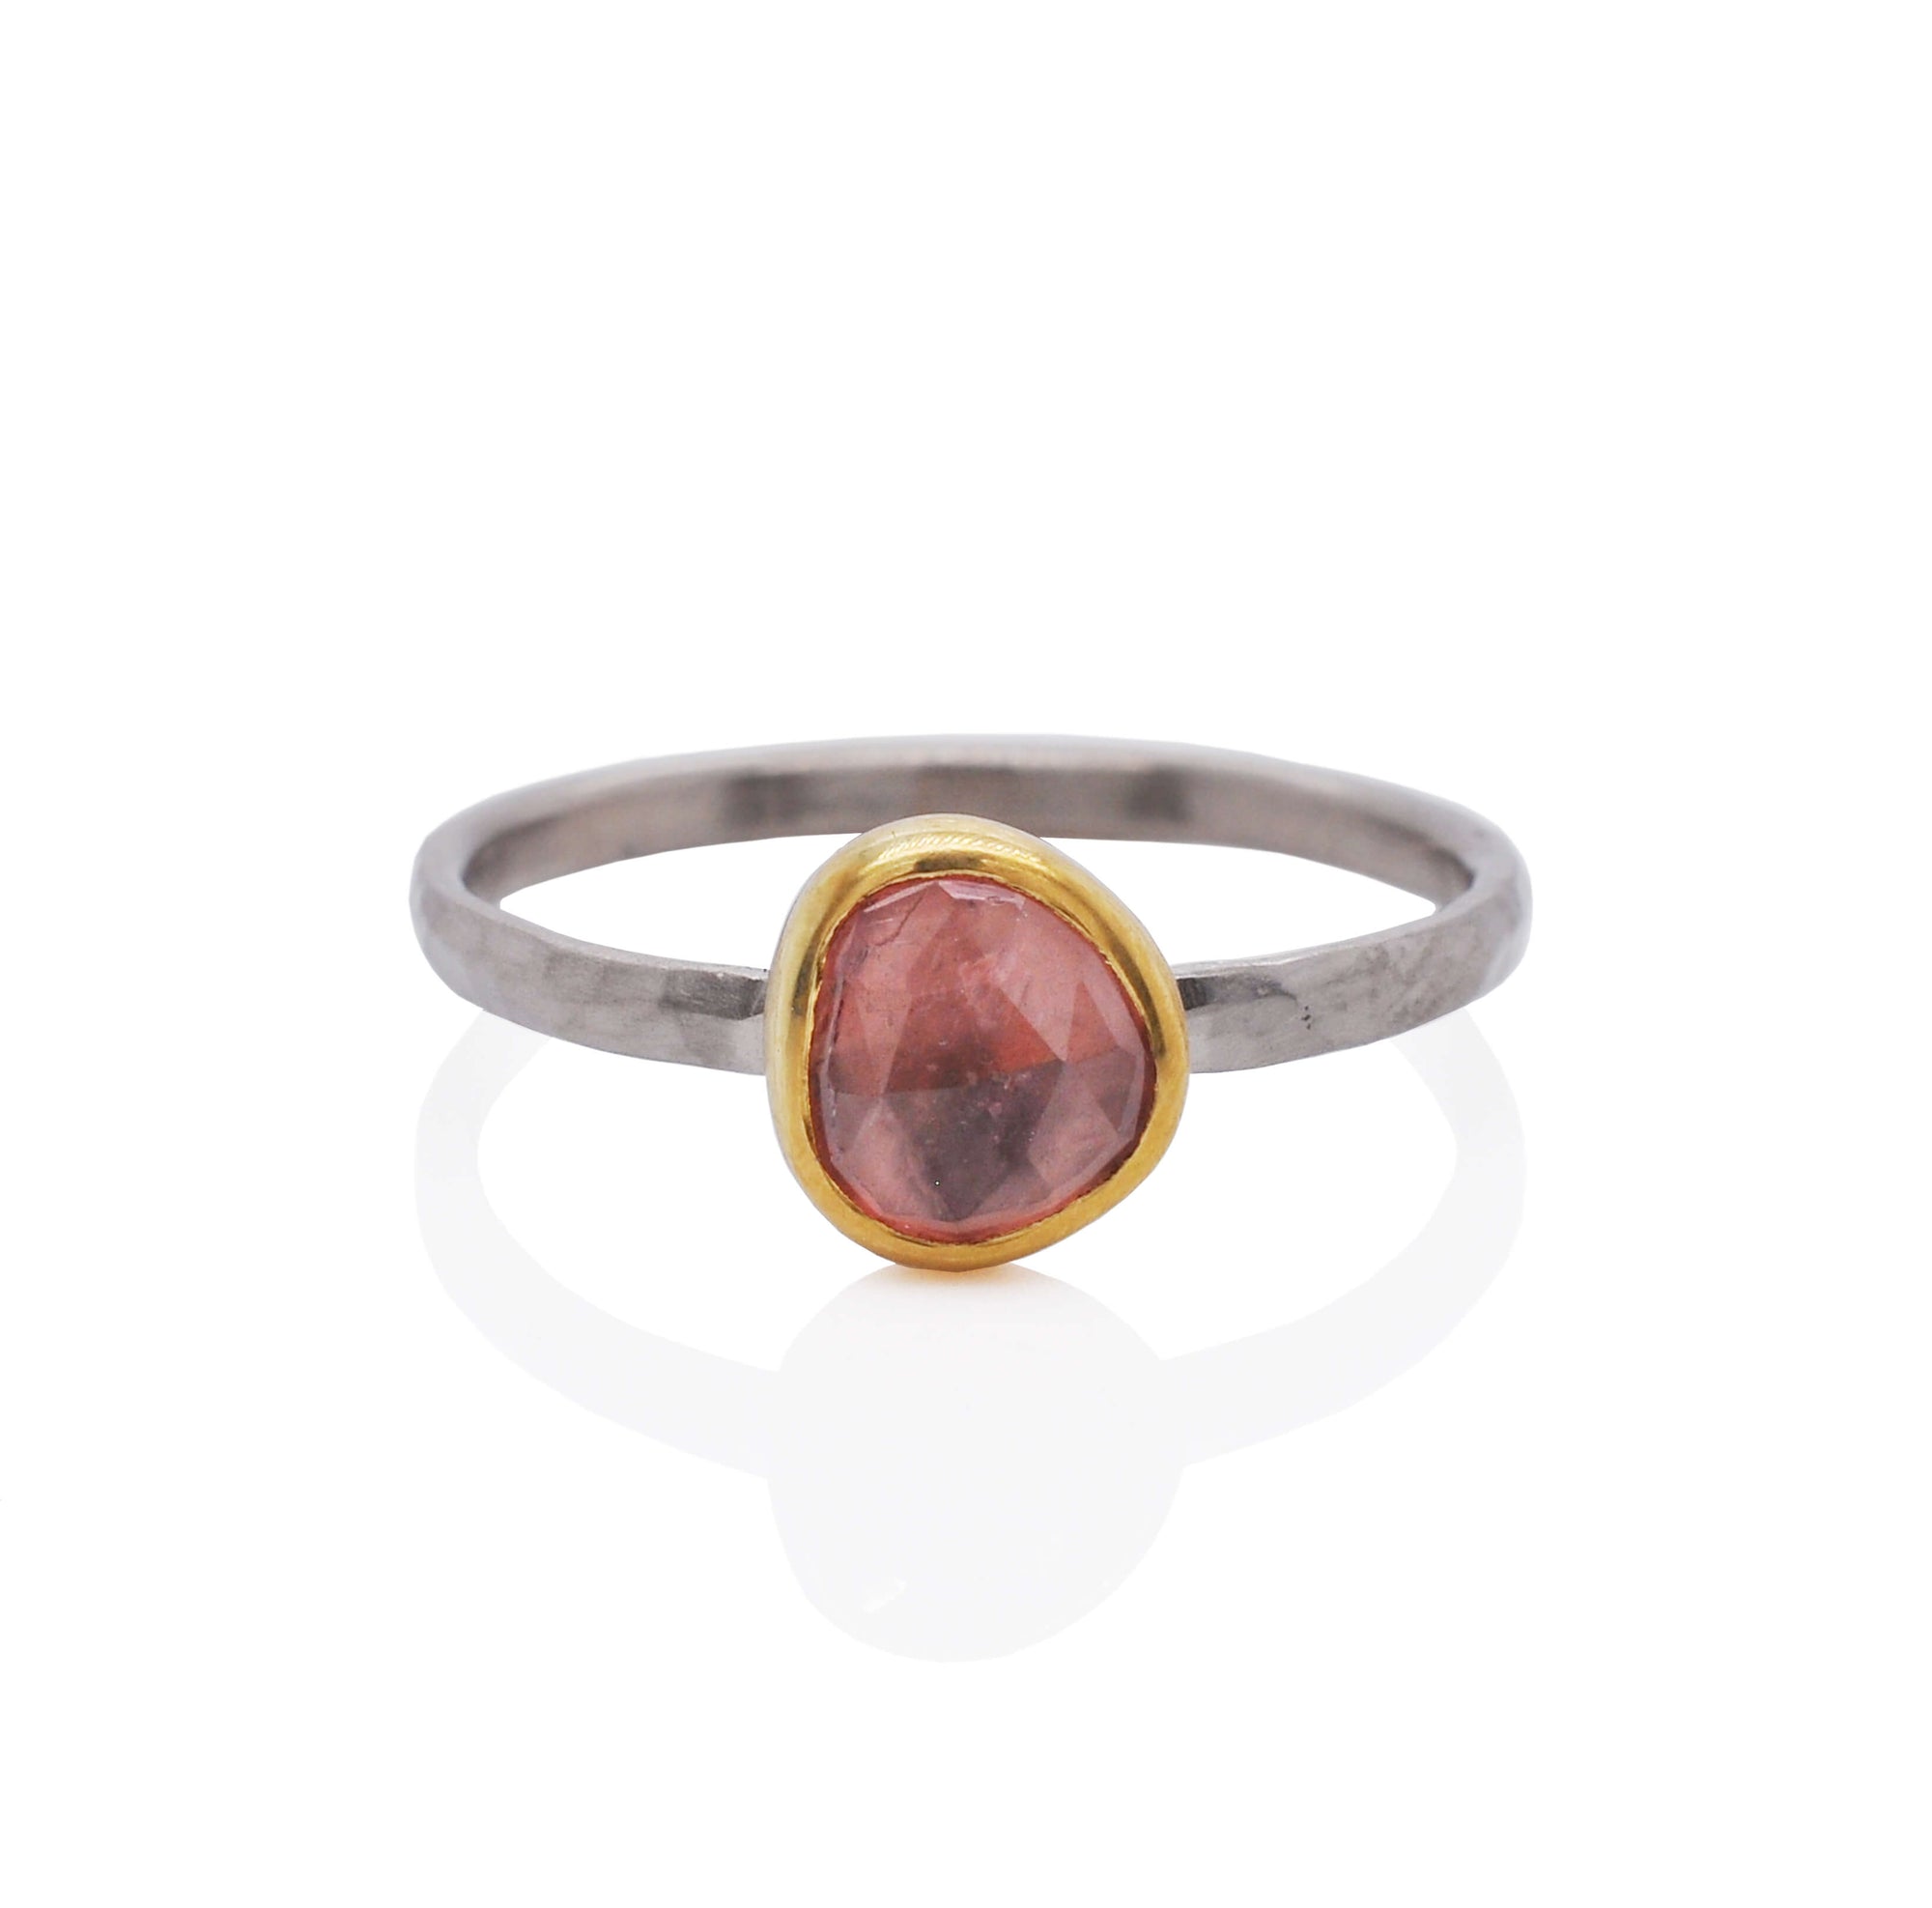 Organic Red Rose Cut Sapphire Ring in Yellow Gold and Palladium